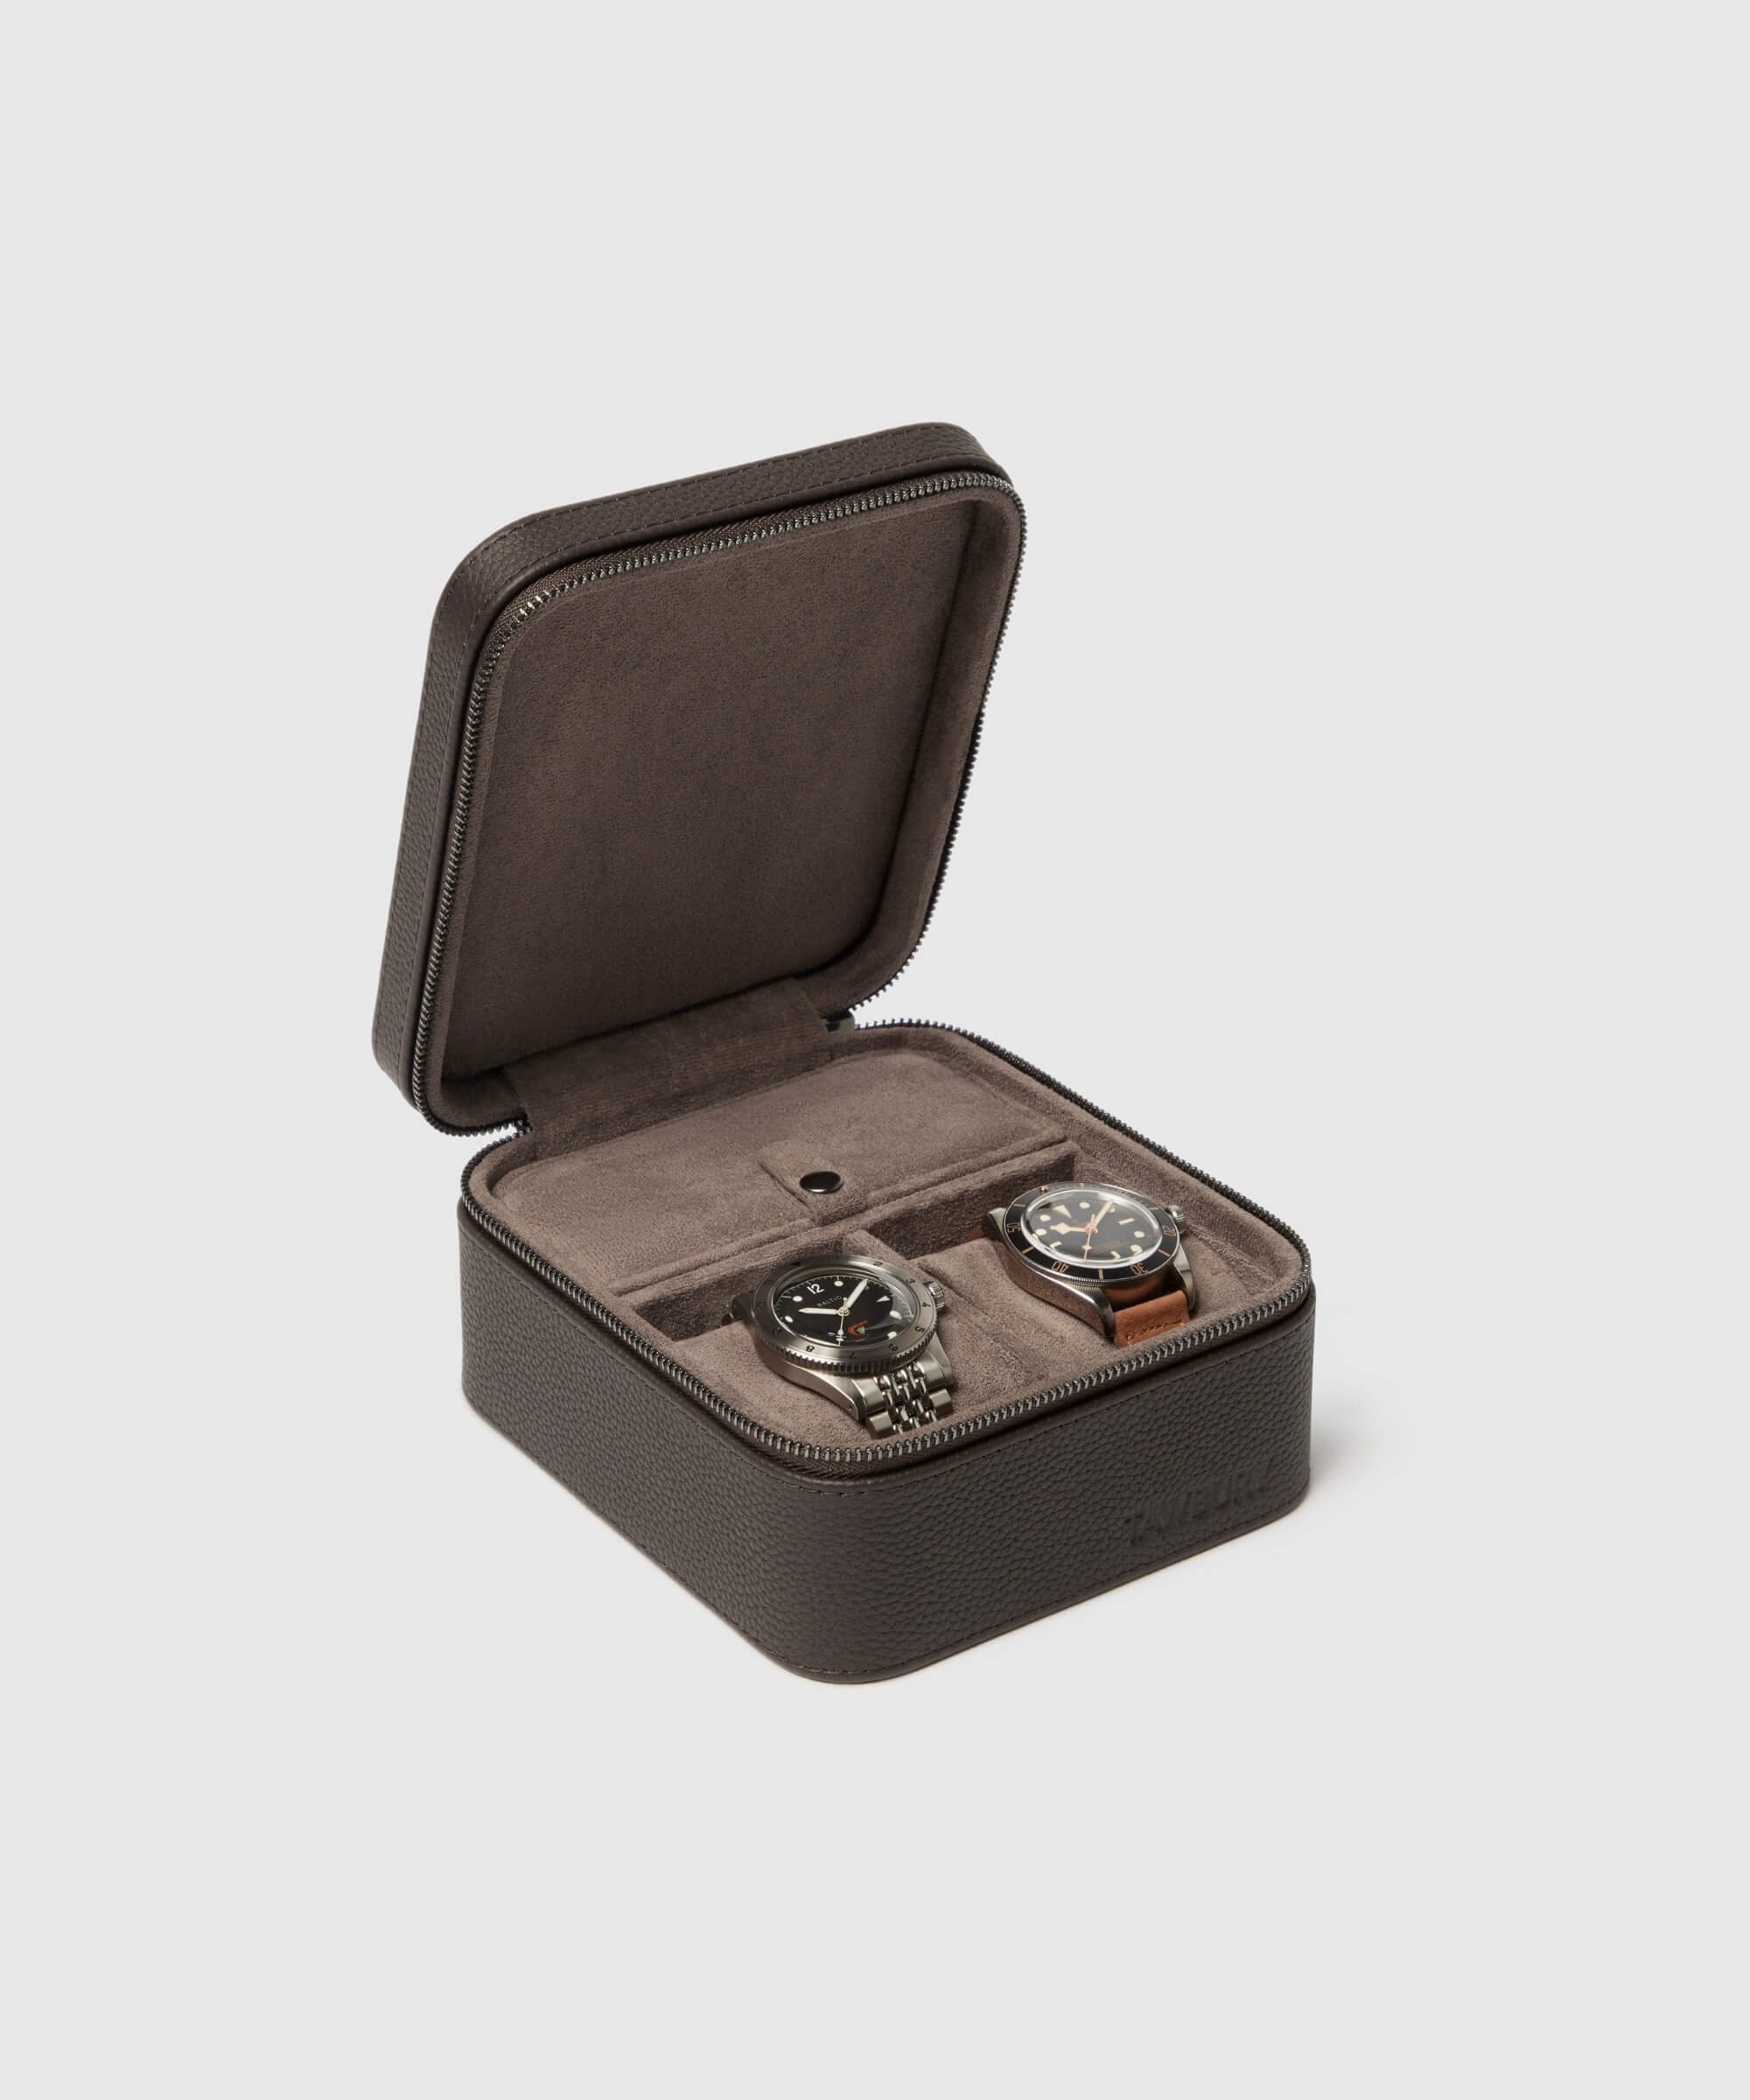 Two Fraser 2 Watch Travel Cases with Storage - Brown in a box on a white background, by TAWBURY.